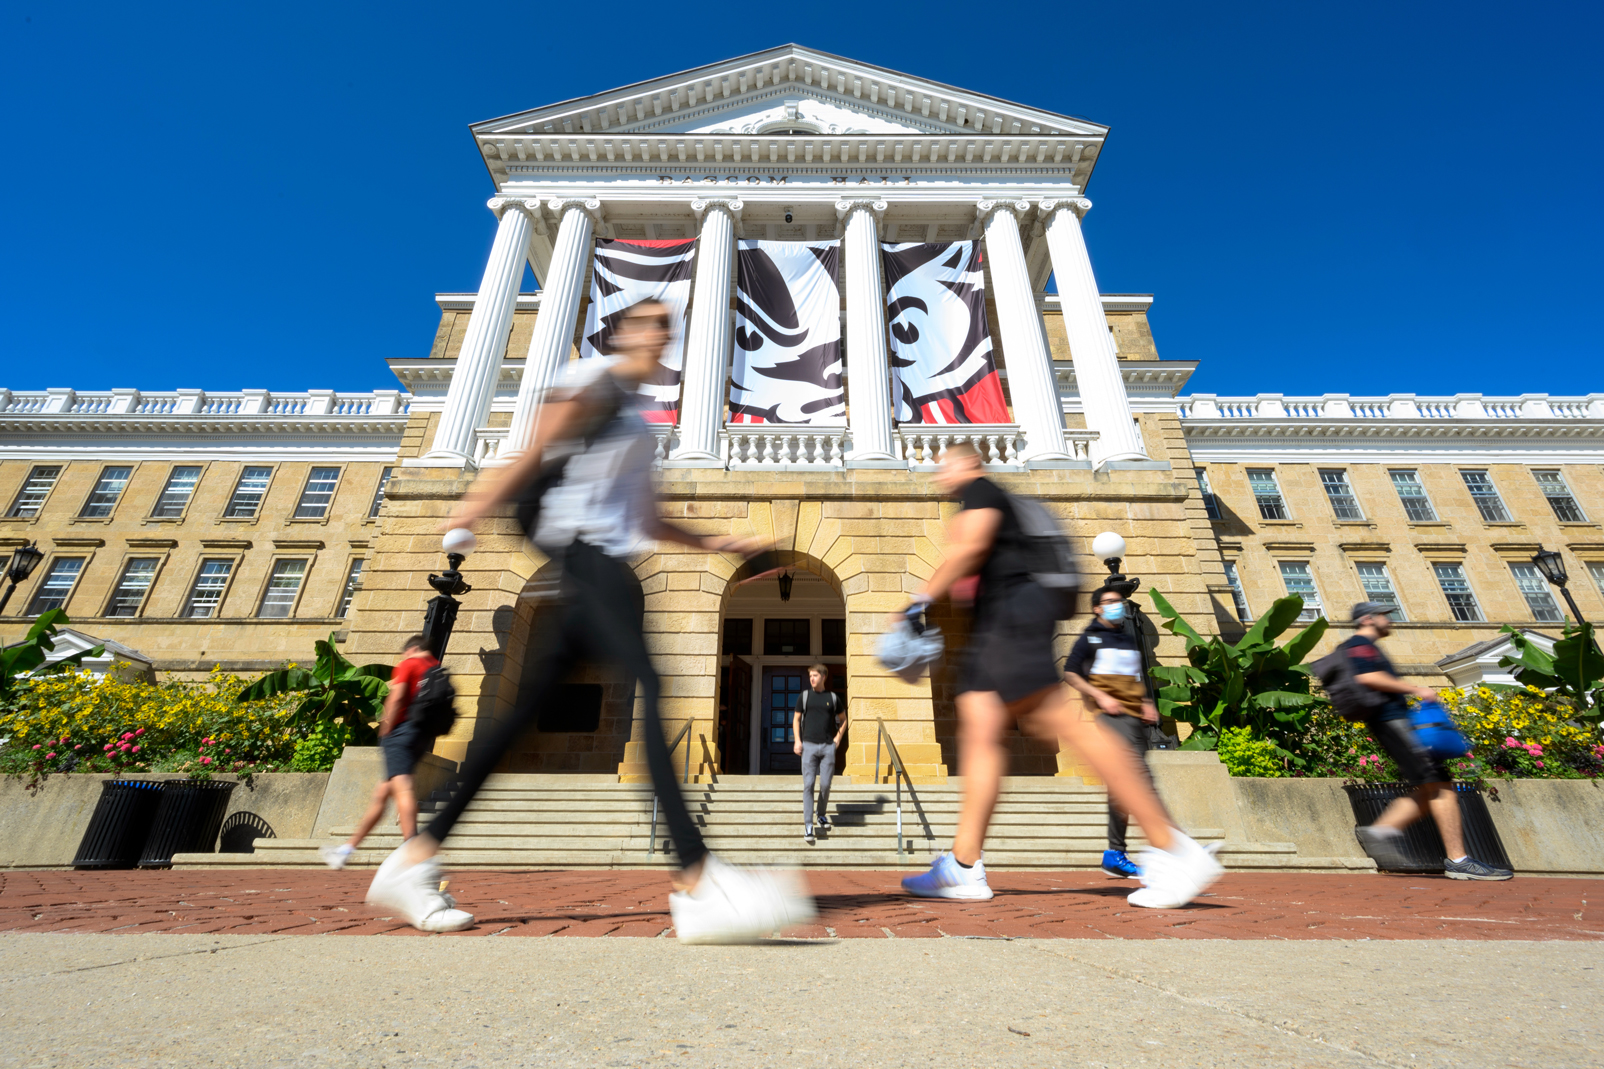 Students walking on campus on a sunny day at The University of Wisconsin-Madison